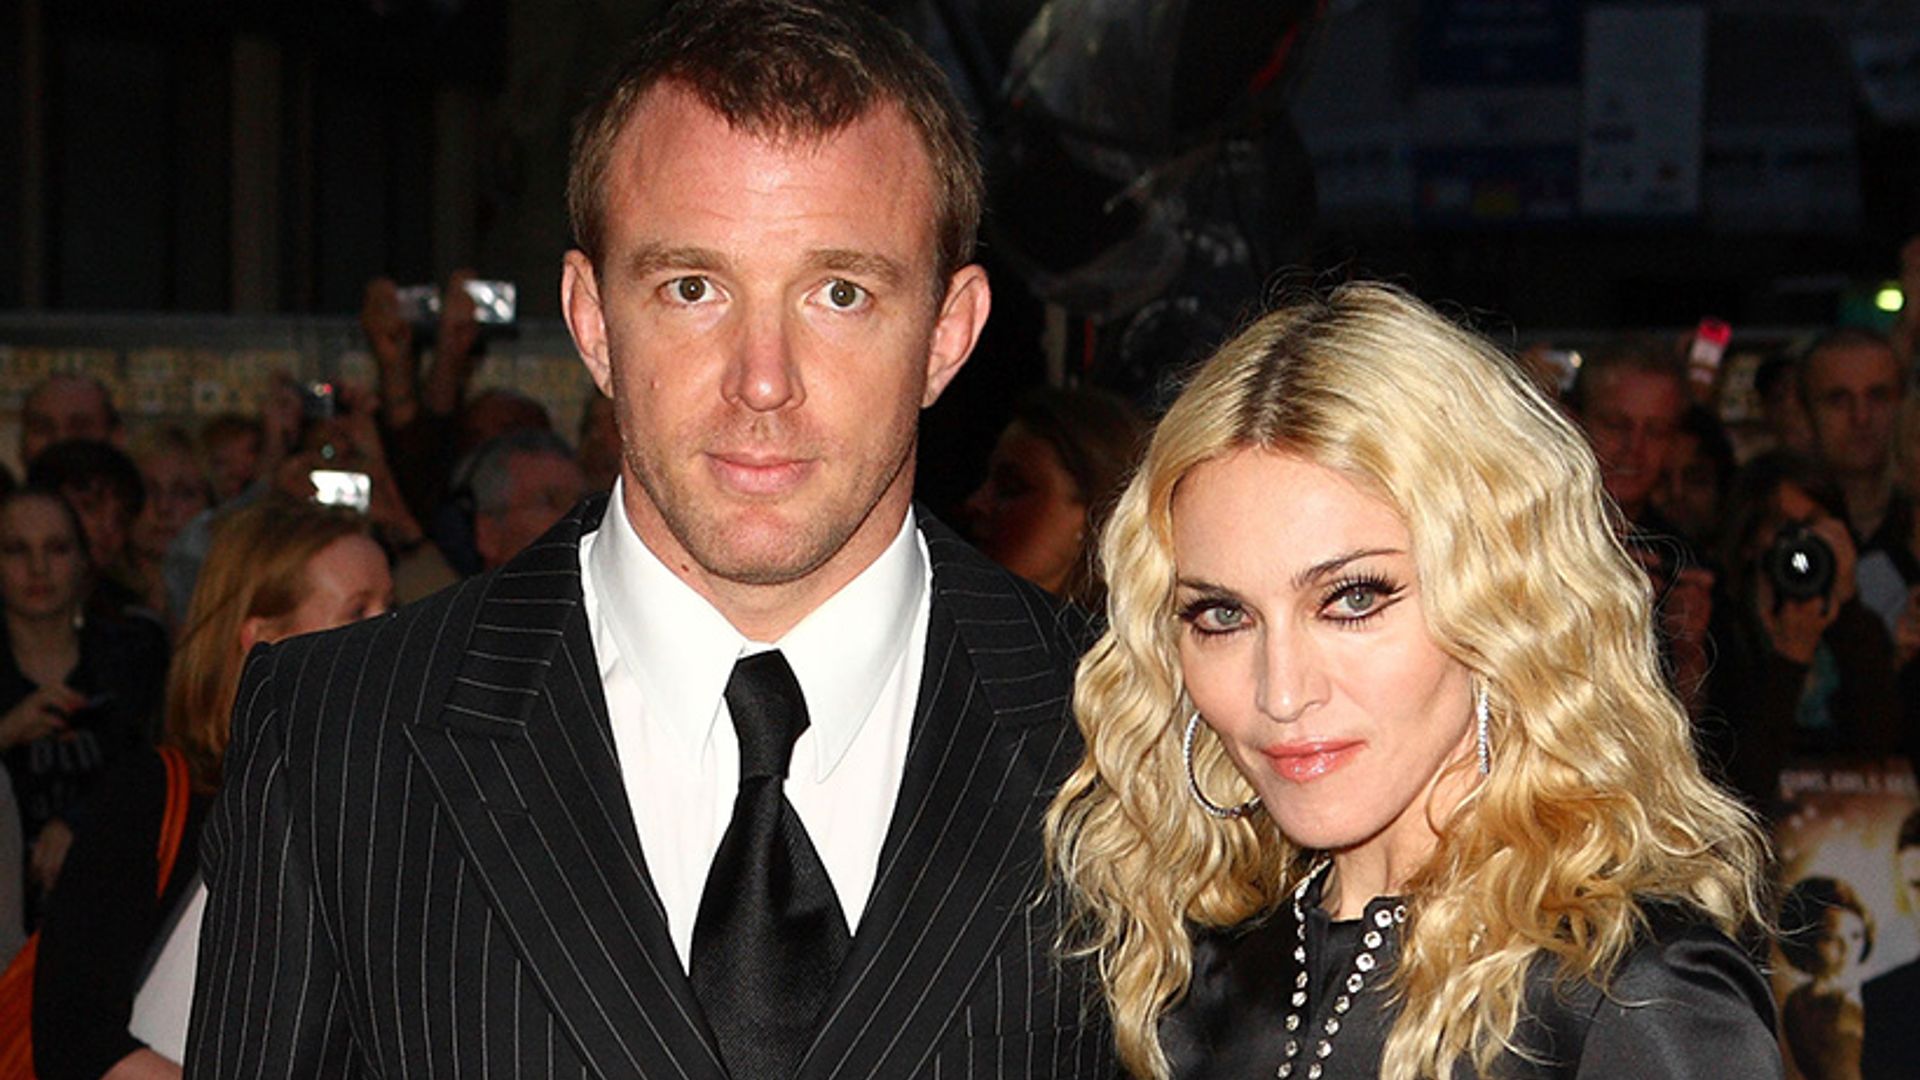 Madonna and Guy Ritchie settle custody battle over son Rocco